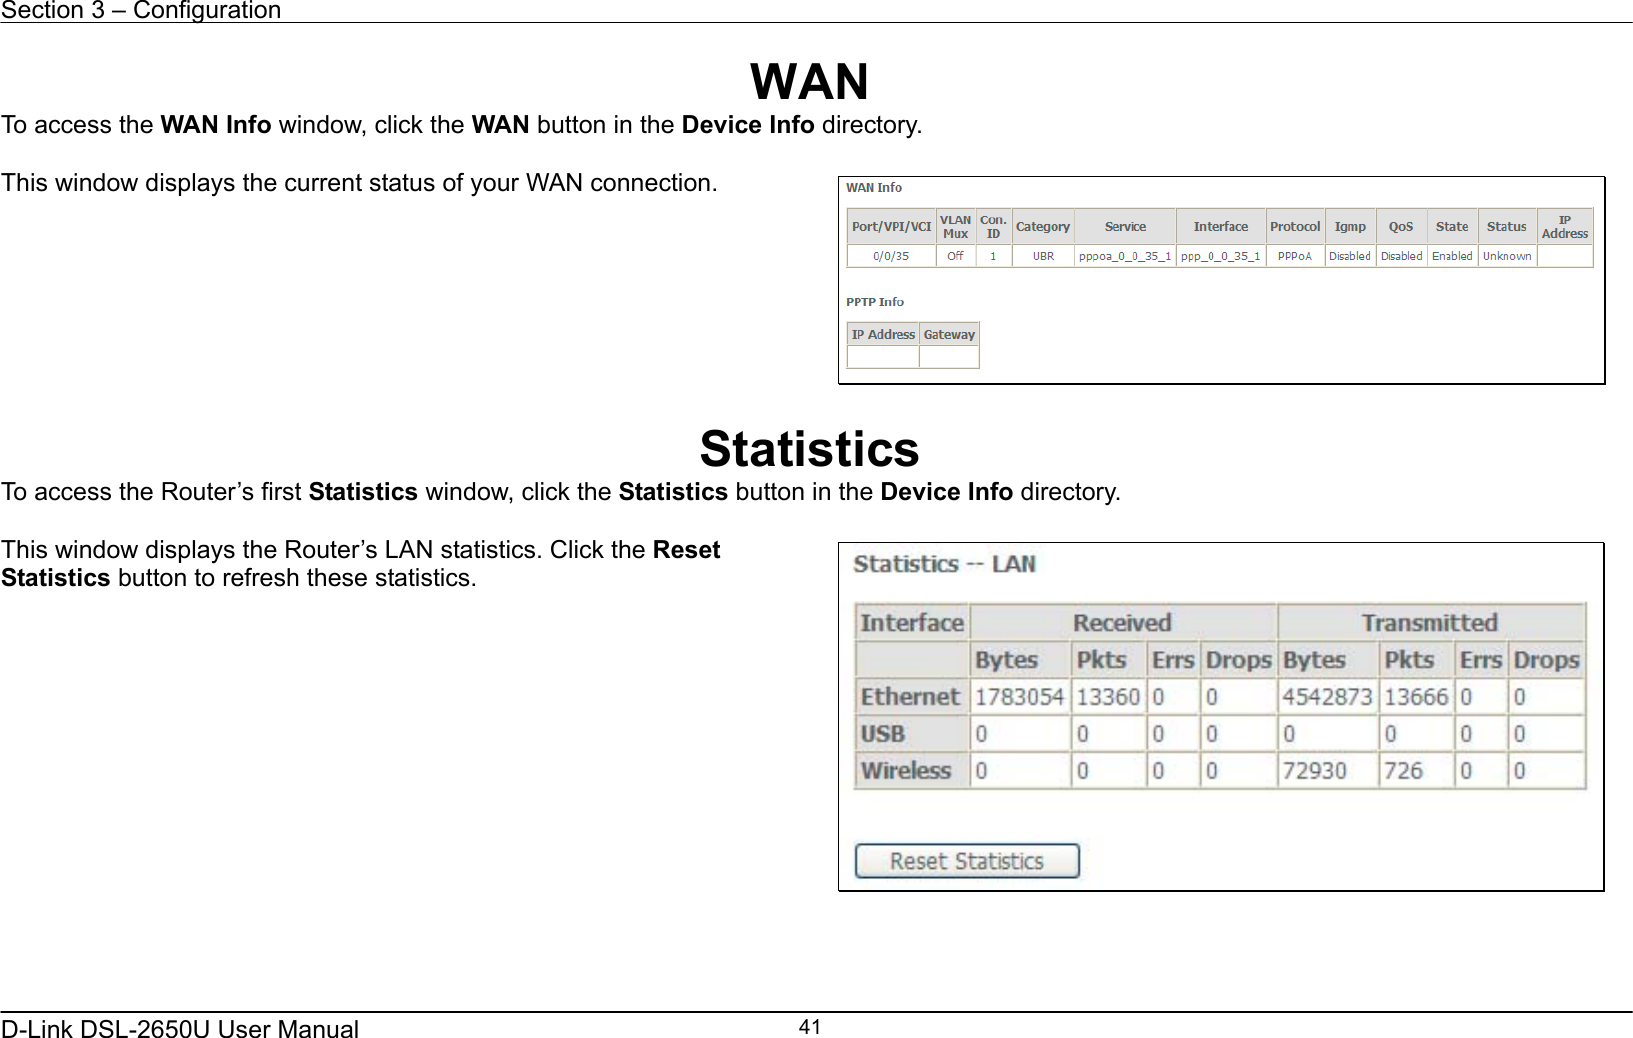 Section 3 – Configuration   D-Link DSL-2650U User Manual    41WAN To access the WAN Info window, click the WAN button in the Device Info directory.  This window displays the current status of your WAN connection.   Statistics To access the Router’s first Statistics window, click the Statistics button in the Device Info directory.  This window displays the Router’s LAN statistics. Click the Reset Statistics button to refresh these statistics.           